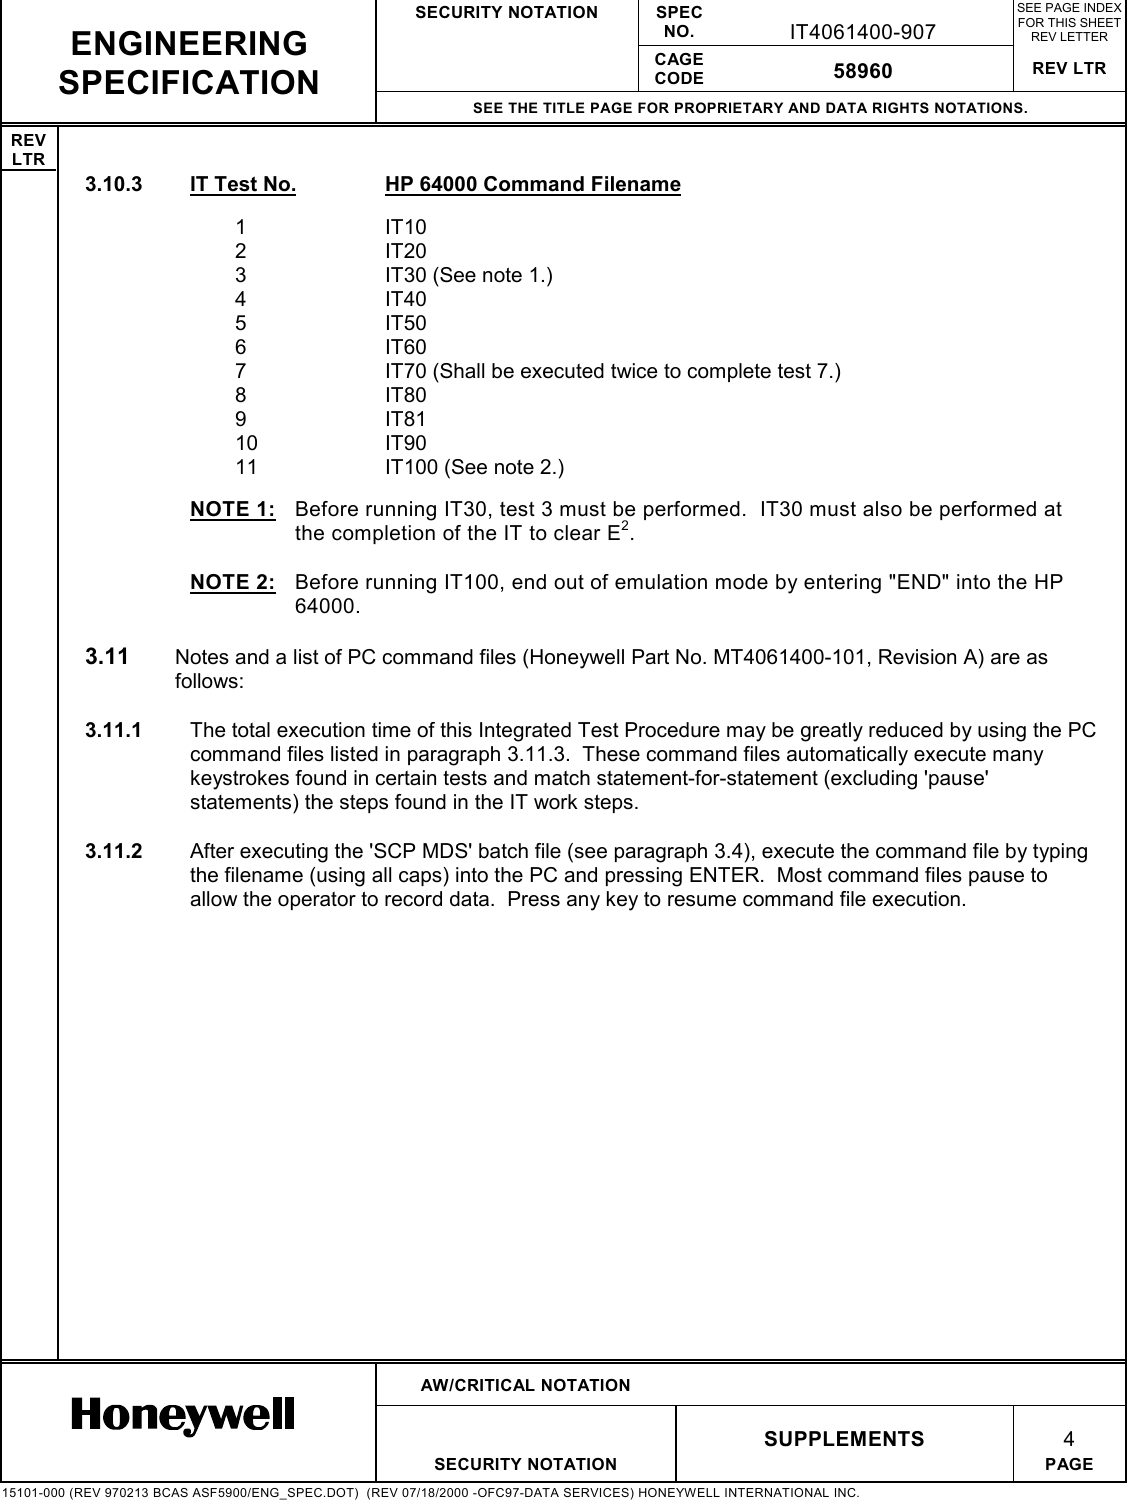 SECURITY NOTATION SPECNO. IT4061400-907SEE PAGE INDEXFOR THIS SHEETREV LETTERCAGECODE 58960 REV LTRSEE THE TITLE PAGE FOR PROPRIETARY AND DATA RIGHTS NOTATIONS.REVLTRAW/CRITICAL NOTATIONSUPPLEMENTS 4SECURITY NOTATION PAGE15101-000 (REV 970213 BCAS ASF5900/ENG_SPEC.DOT)  (REV 07/18/2000 -OFC97-DATA SERVICES) HONEYWELL INTERNATIONAL INC.ENGINEERINGSPECIFICATION3.10.3  IT Test No. HP 64000 Command Filename1IT102IT203 IT30 (See note 1.)4IT405IT506IT607 IT70 (Shall be executed twice to complete test 7.)8IT809IT8110 IT9011 IT100 (See note 2.)NOTE 1:  Before running IT30, test 3 must be performed.  IT30 must also be performed atthe completion of the IT to clear E2.NOTE 2:  Before running IT100, end out of emulation mode by entering &quot;END&quot; into the HP64000.3.11  Notes and a list of PC command files (Honeywell Part No. MT4061400-101, Revision A) are asfollows:3.11.1  The total execution time of this Integrated Test Procedure may be greatly reduced by using the PCcommand files listed in paragraph 3.11.3.  These command files automatically execute manykeystrokes found in certain tests and match statement-for-statement (excluding &apos;pause&apos;statements) the steps found in the IT work steps.3.11.2  After executing the &apos;SCP MDS&apos; batch file (see paragraph 3.4), execute the command file by typingthe filename (using all caps) into the PC and pressing ENTER.  Most command files pause toallow the operator to record data.  Press any key to resume command file execution.